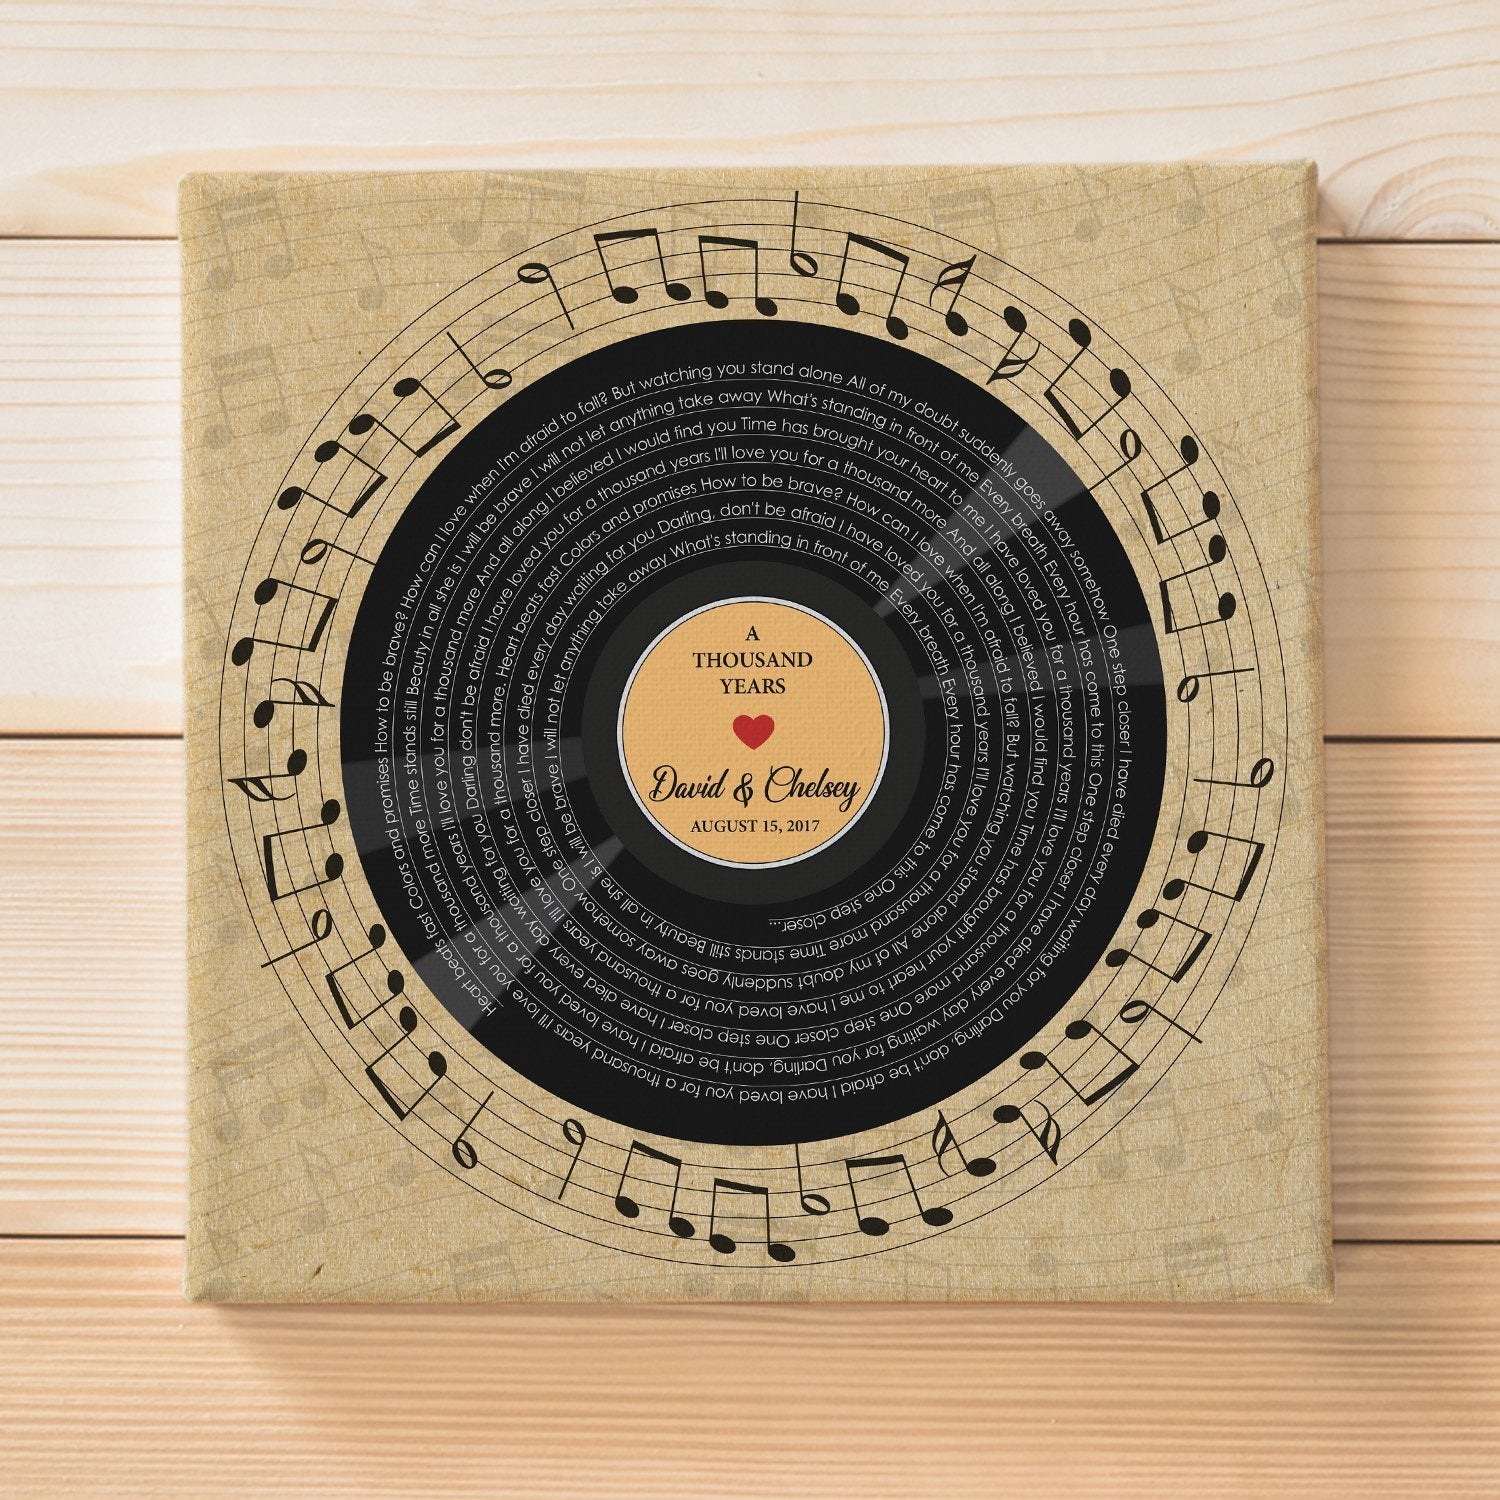 Custom Sound Wave Art, personalized vinyl record, Anniversary gift for him,  Mothers Day gift for mom, custom song print, Wedding gift